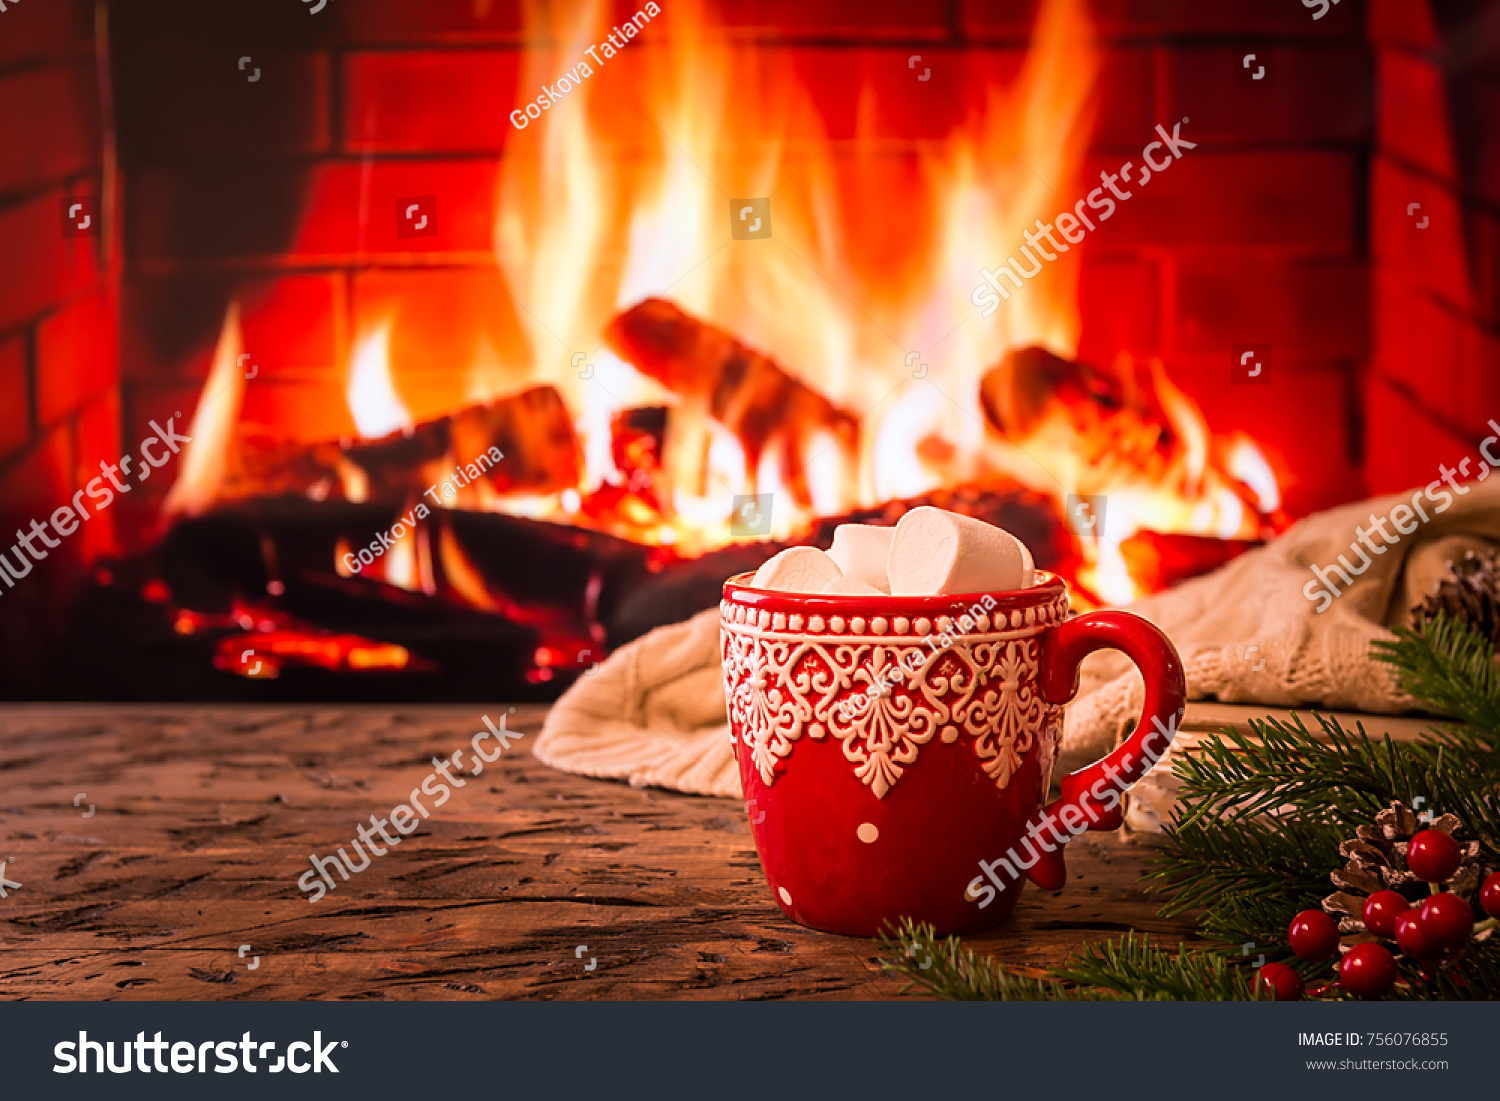 Mug of hot chocolate or coffee with marshmallows in a red mug on vintage wood table in front of Fireplace as a background. Christmas or winter warming drink. #756076855